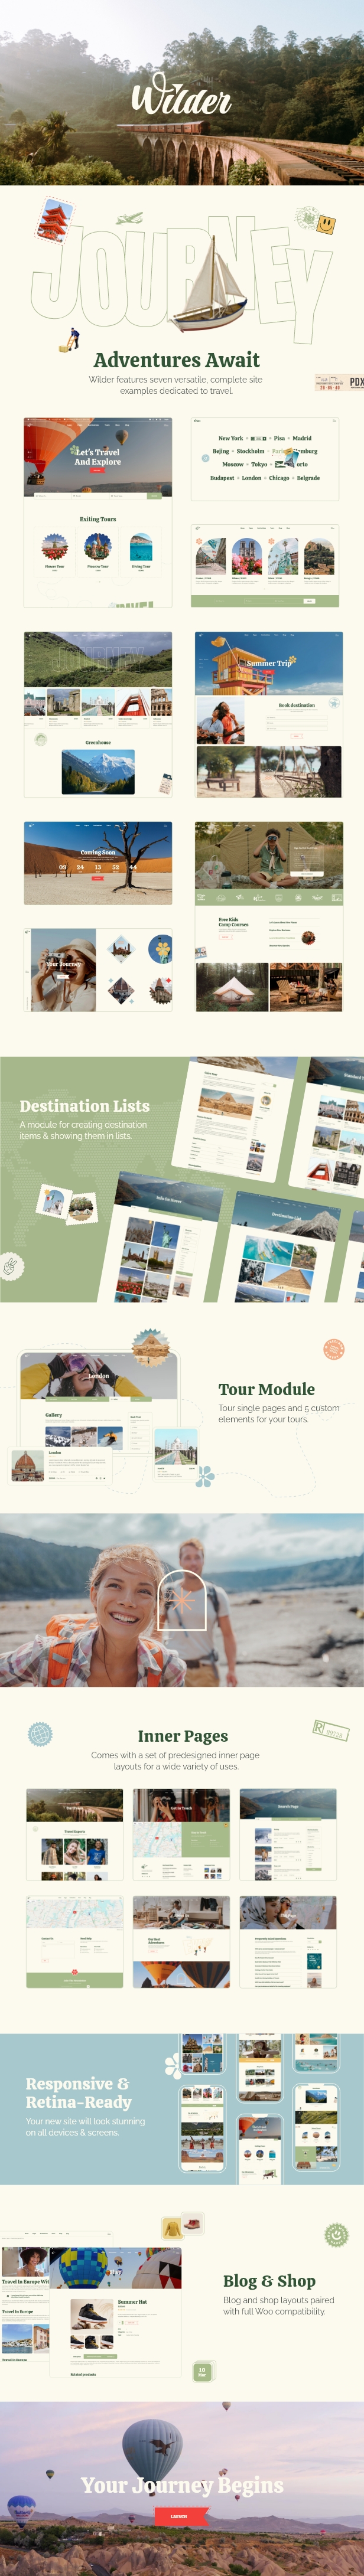 Wilder - Travel Agency and Tourism Theme - 2